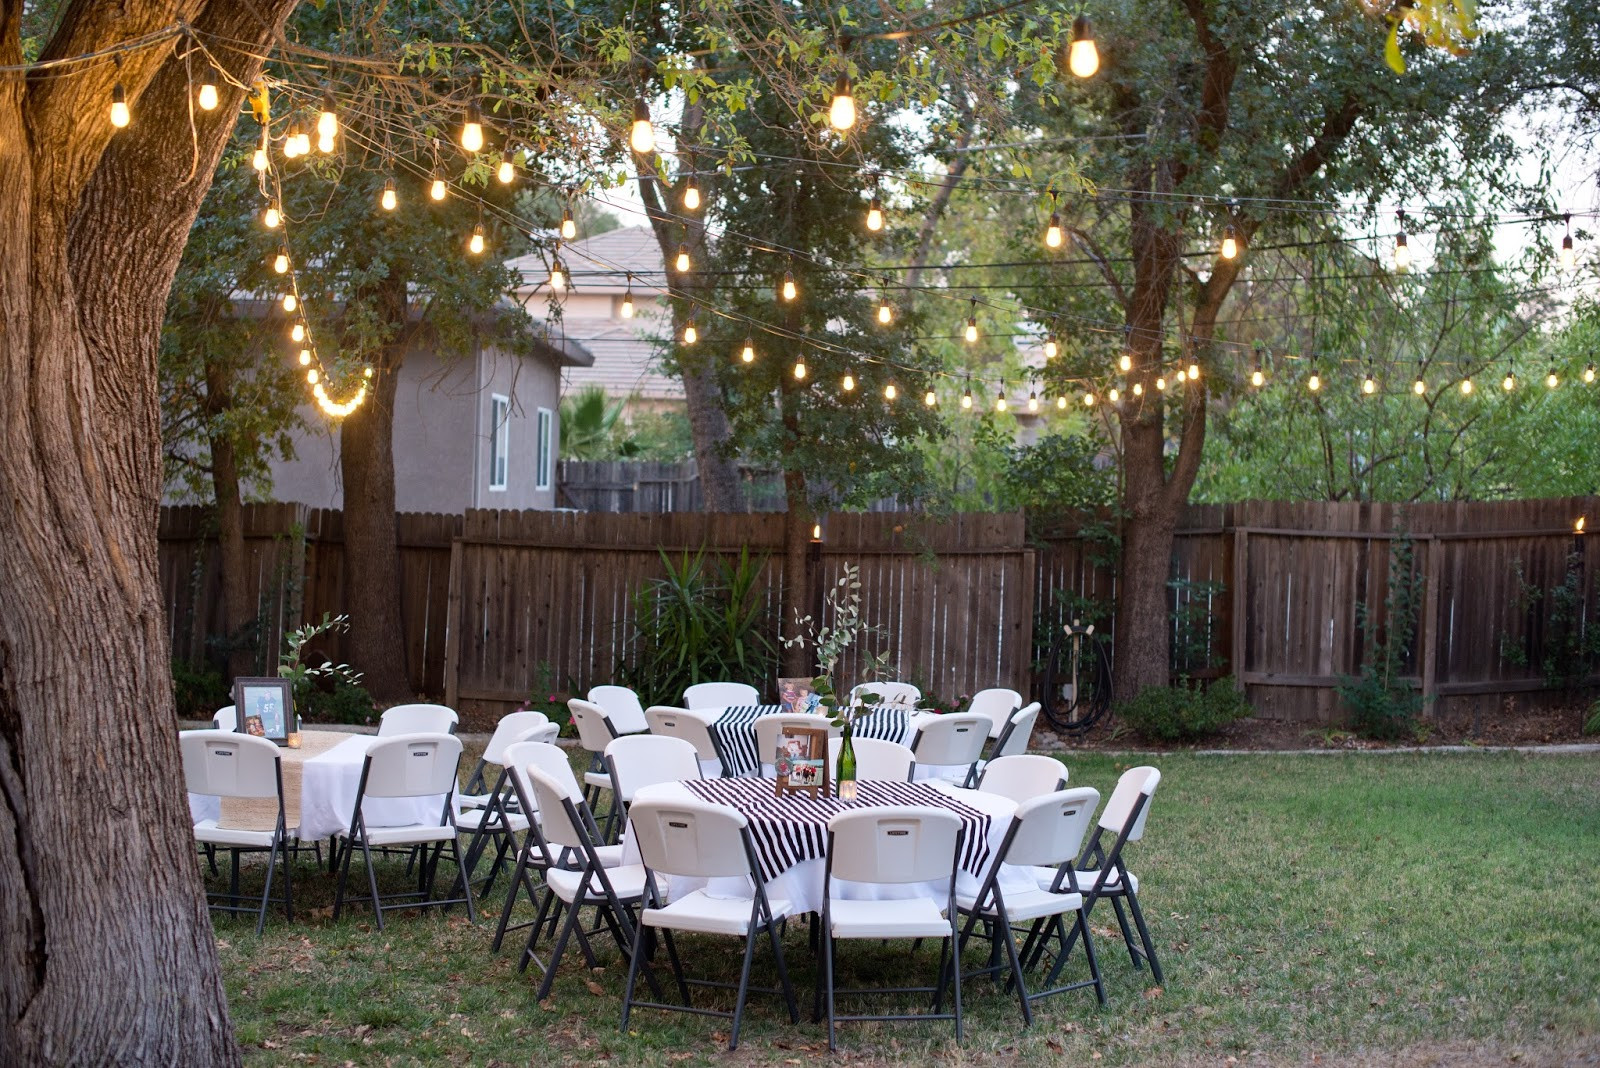 Backyard Party Ideas For Adults
 Domestic Fashionista Backyard Birthday Party For the Guy